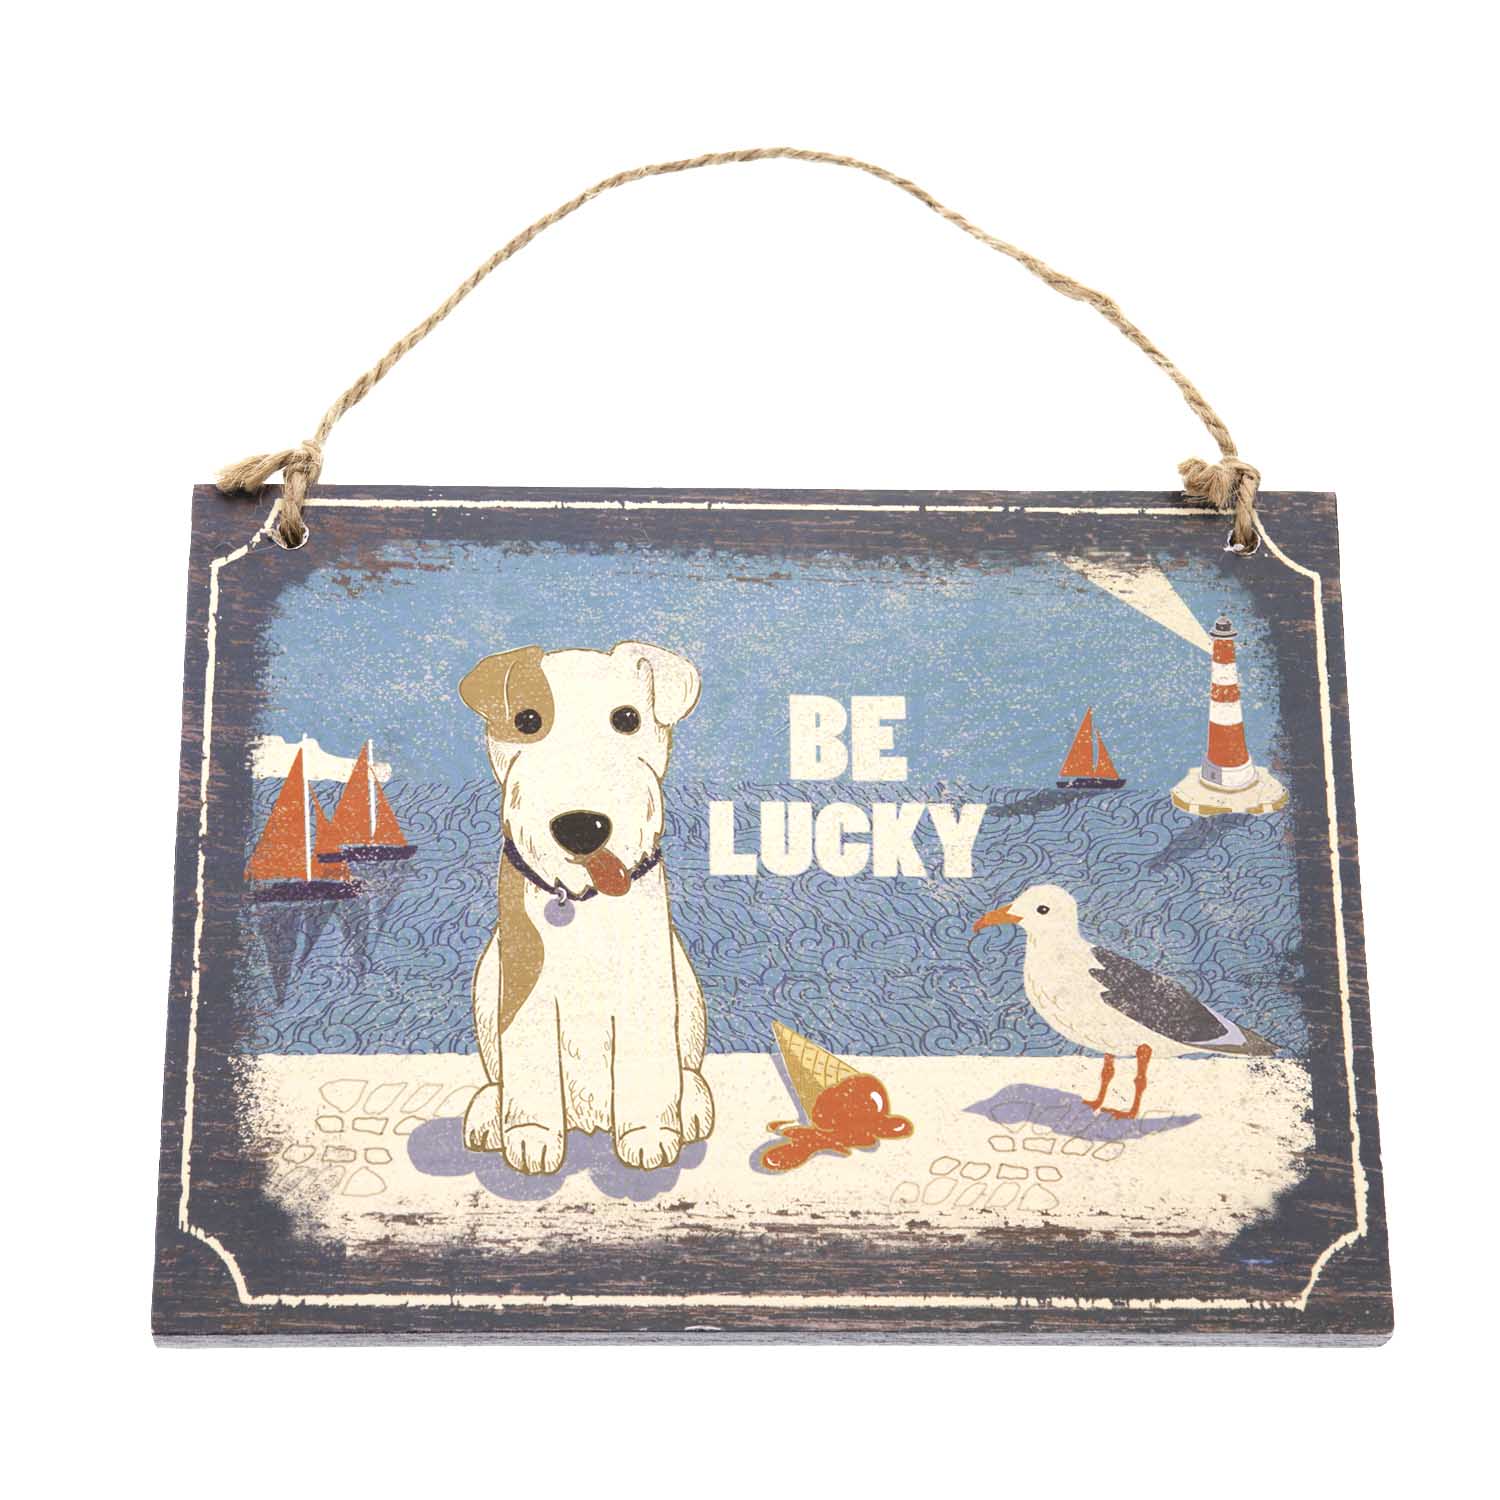 Dog Lover Gifts available at Dog Krazy Gifts – Jill White Rocket68 Ahoy Hanging Wooden Sign available at www.dogkrazygifts.co.uk